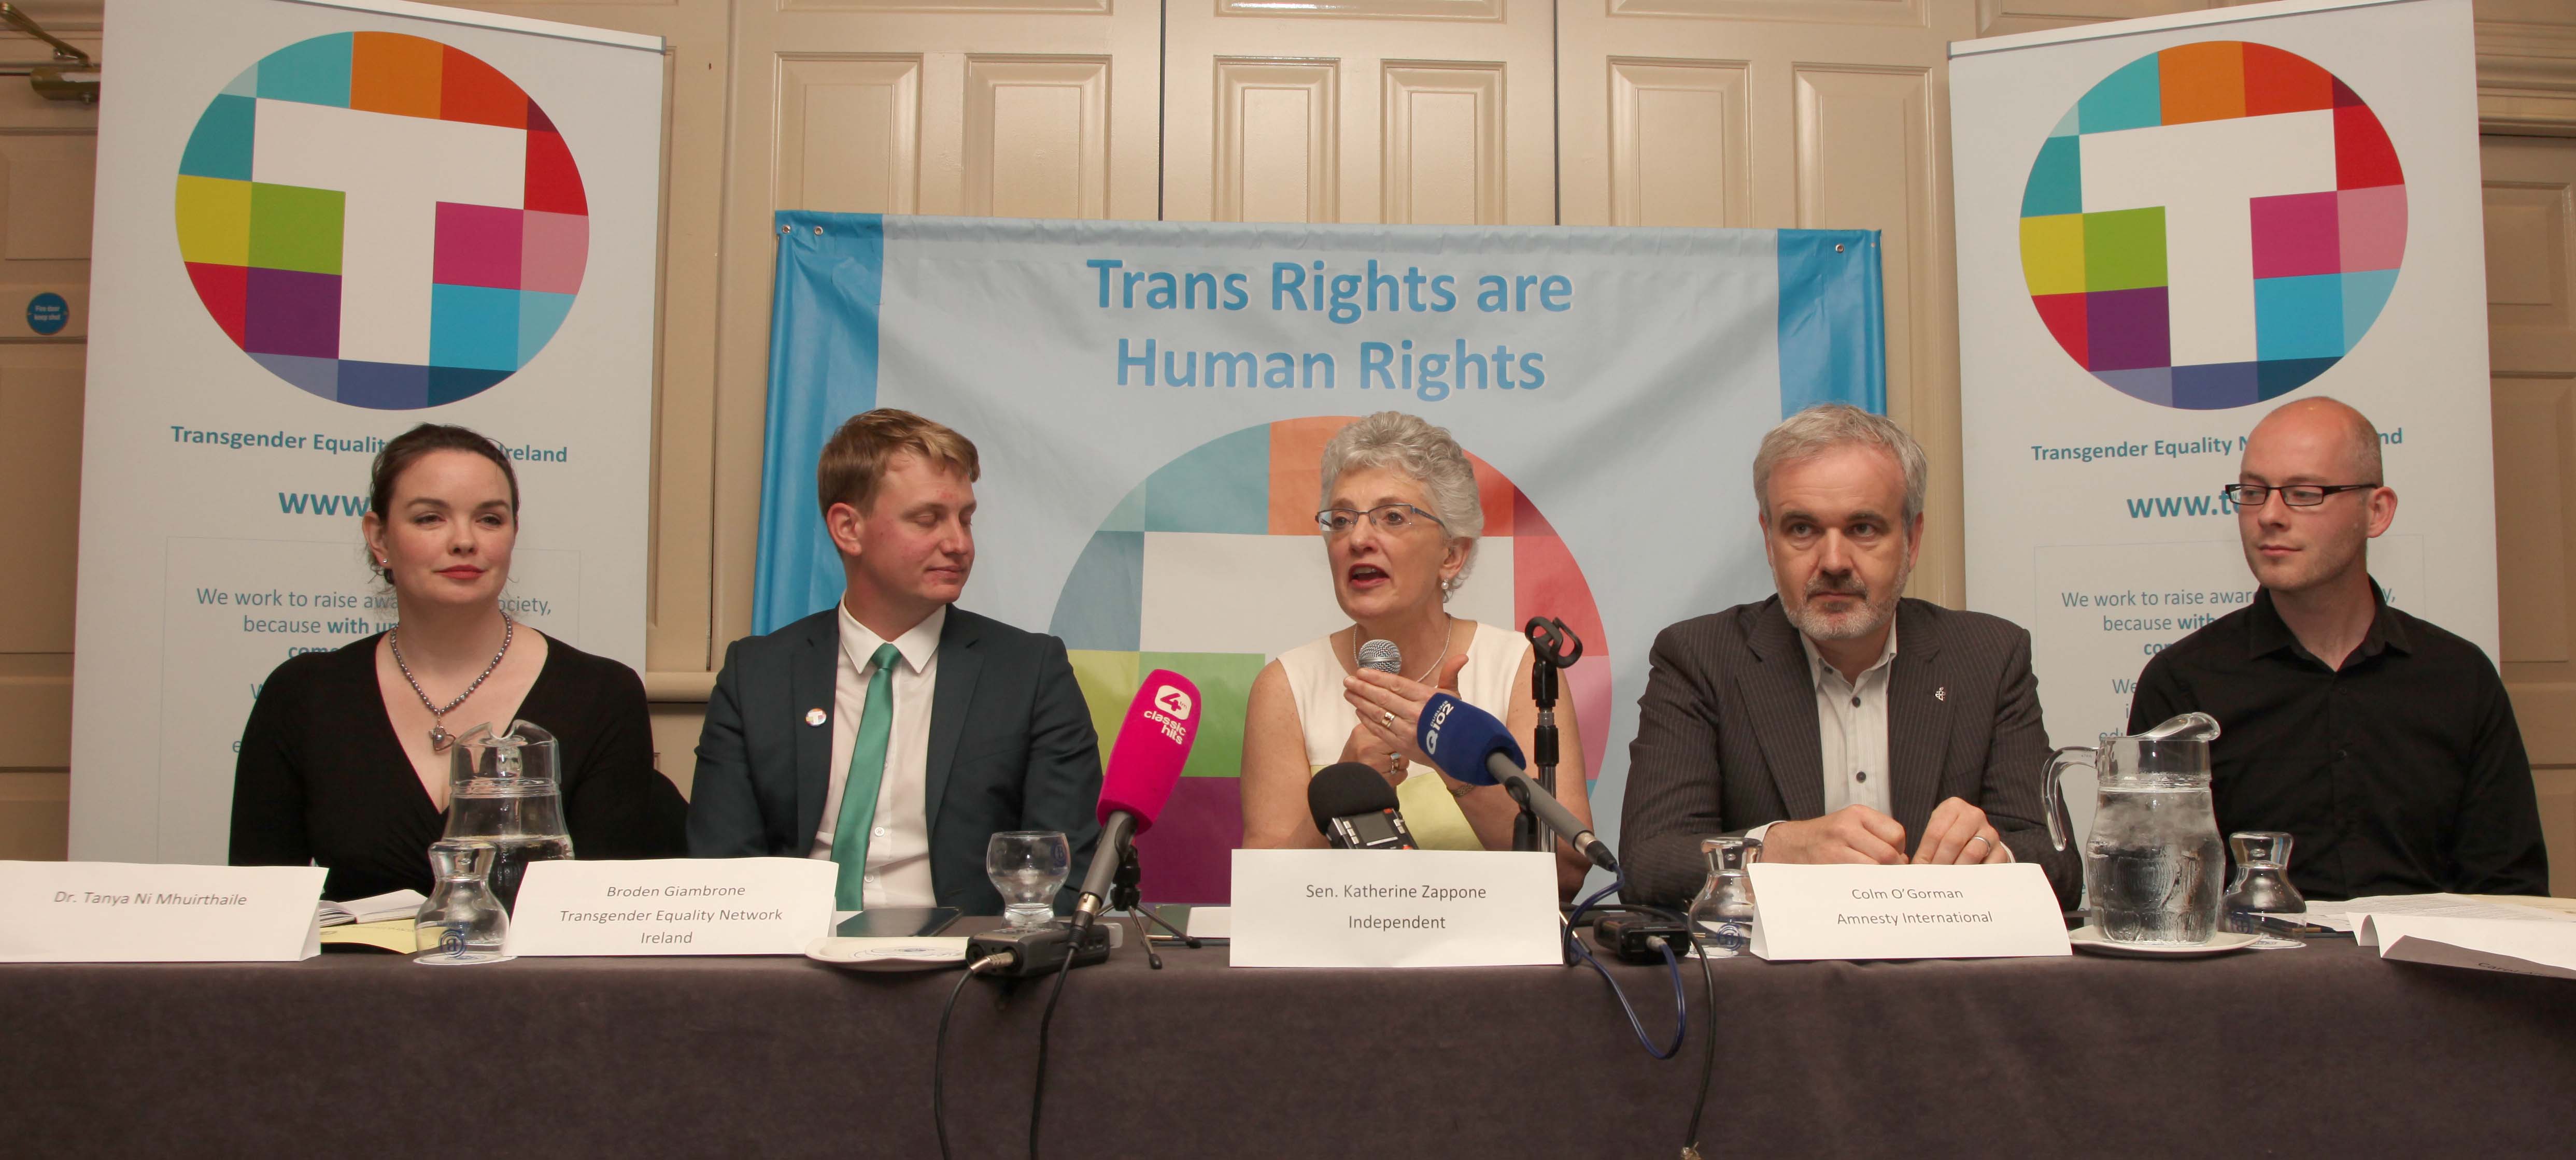 Tanya ni mhuirthile, broden giambrone, senator katherine zappone, colm o'gorman and john duffy at the launch of the gender recognition bill 2013 photo